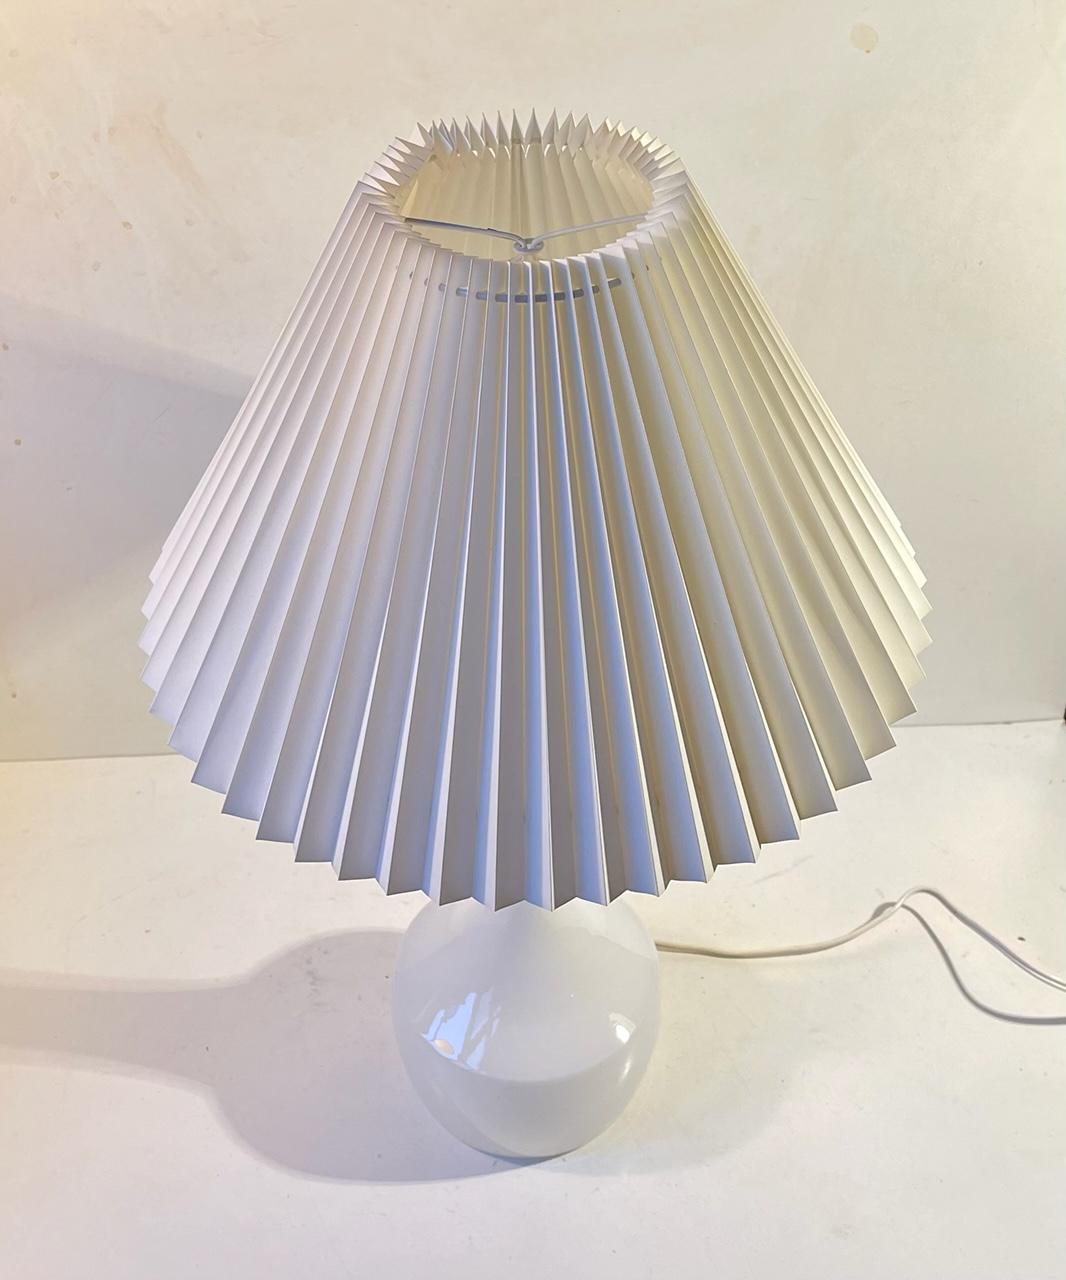 Blown Glass Jacob E. Bang Table Lamp White Opaline Glass, Holmegaard/Kastrup, 1950s For Sale